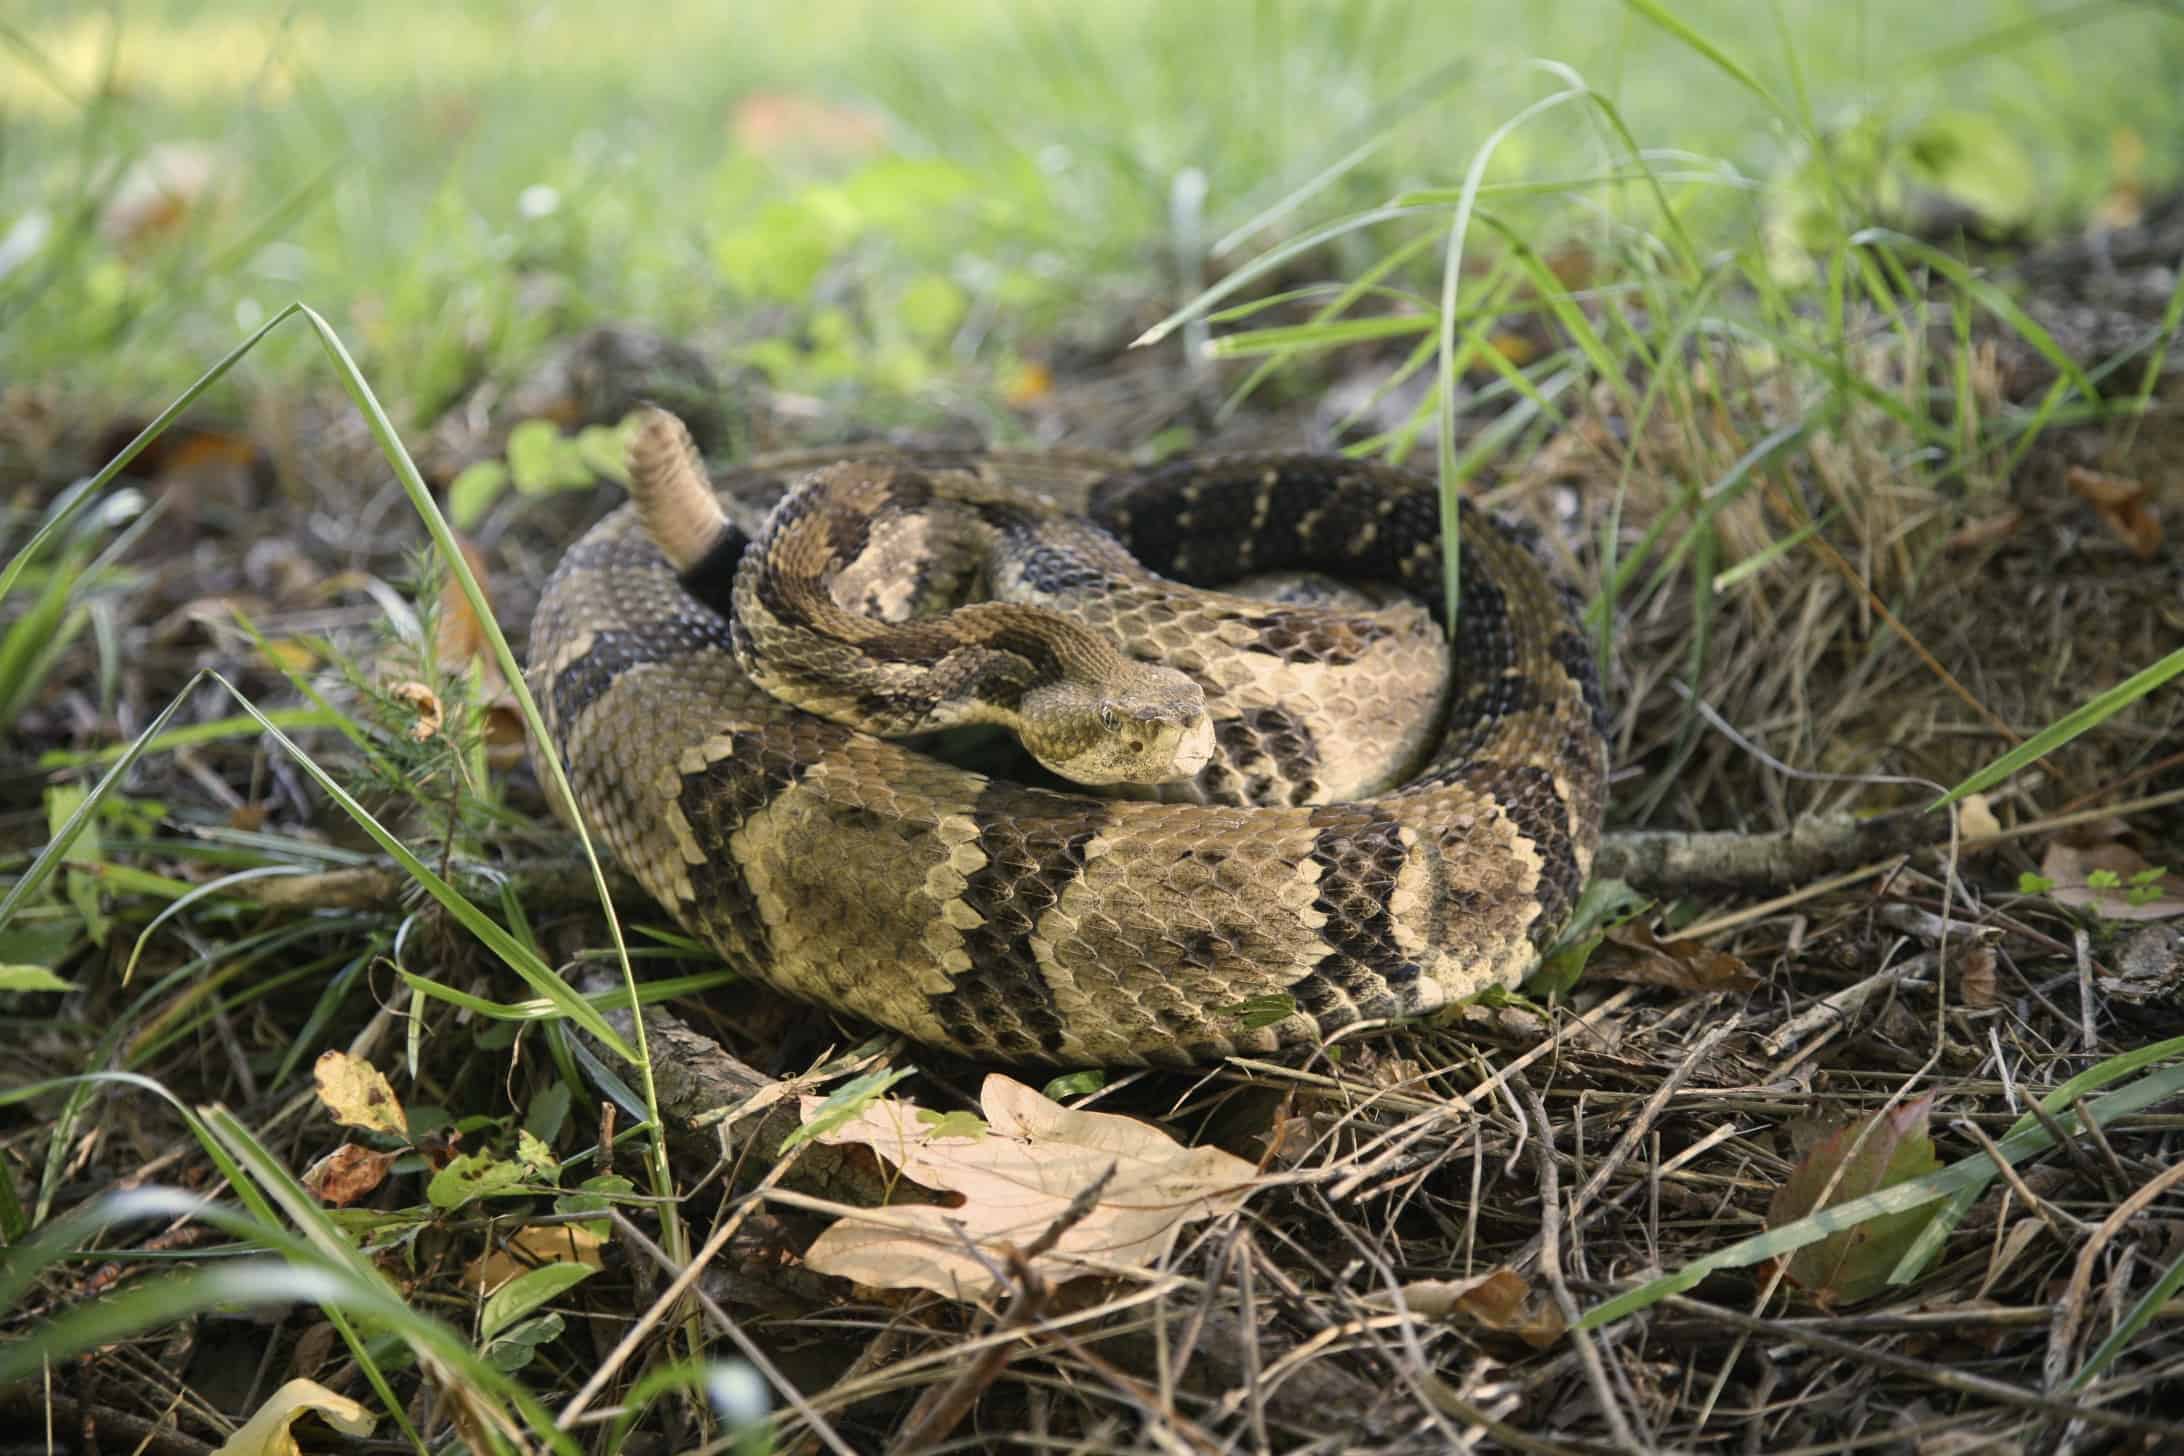 Timber rattlesnakes coiled around the ground.